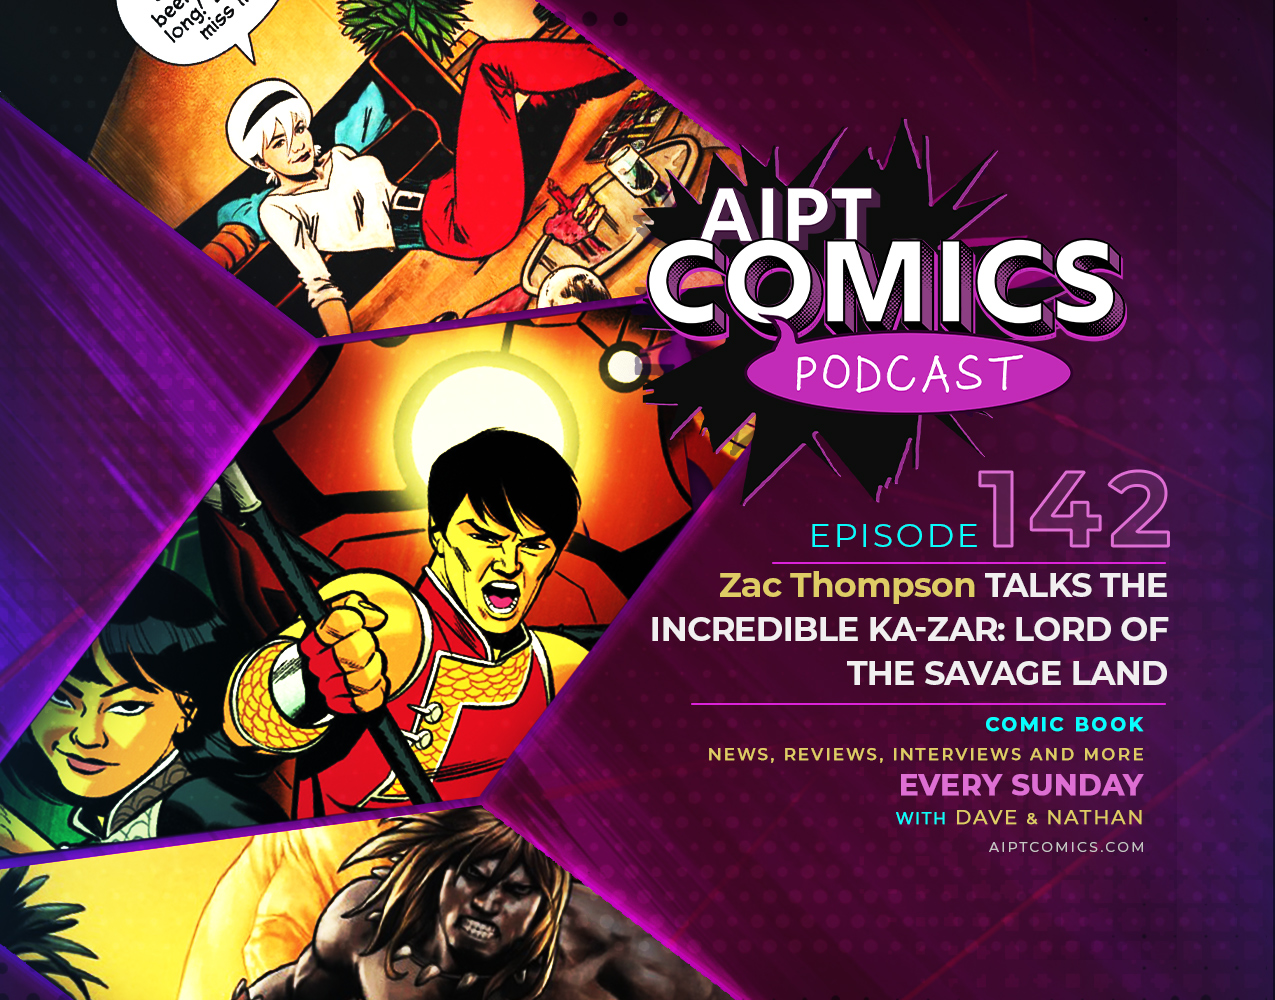 AIPT Comics Podcast episode 142: Zac Thompson talks the incredible 'Ka-Zar: Lord of the Savage Land'